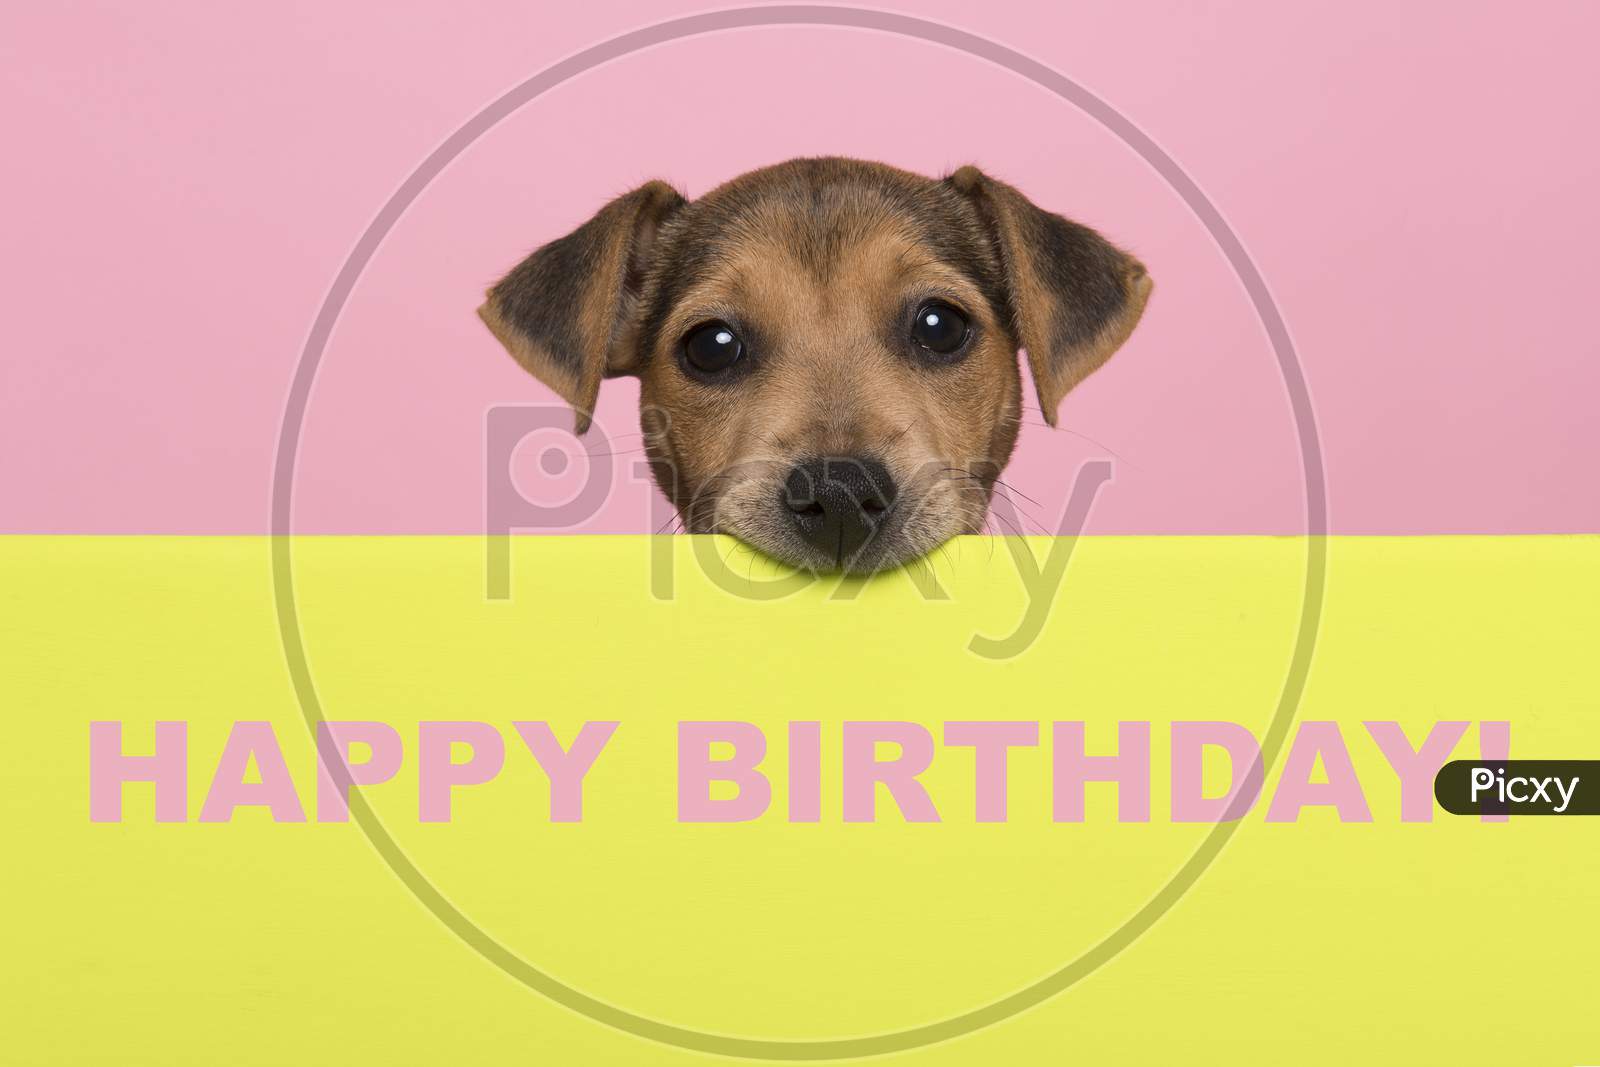 Birthday Card With A Jack Russell Terrier Puppy Chewing On A Border Looking At The Camera With Text Happy Birthday